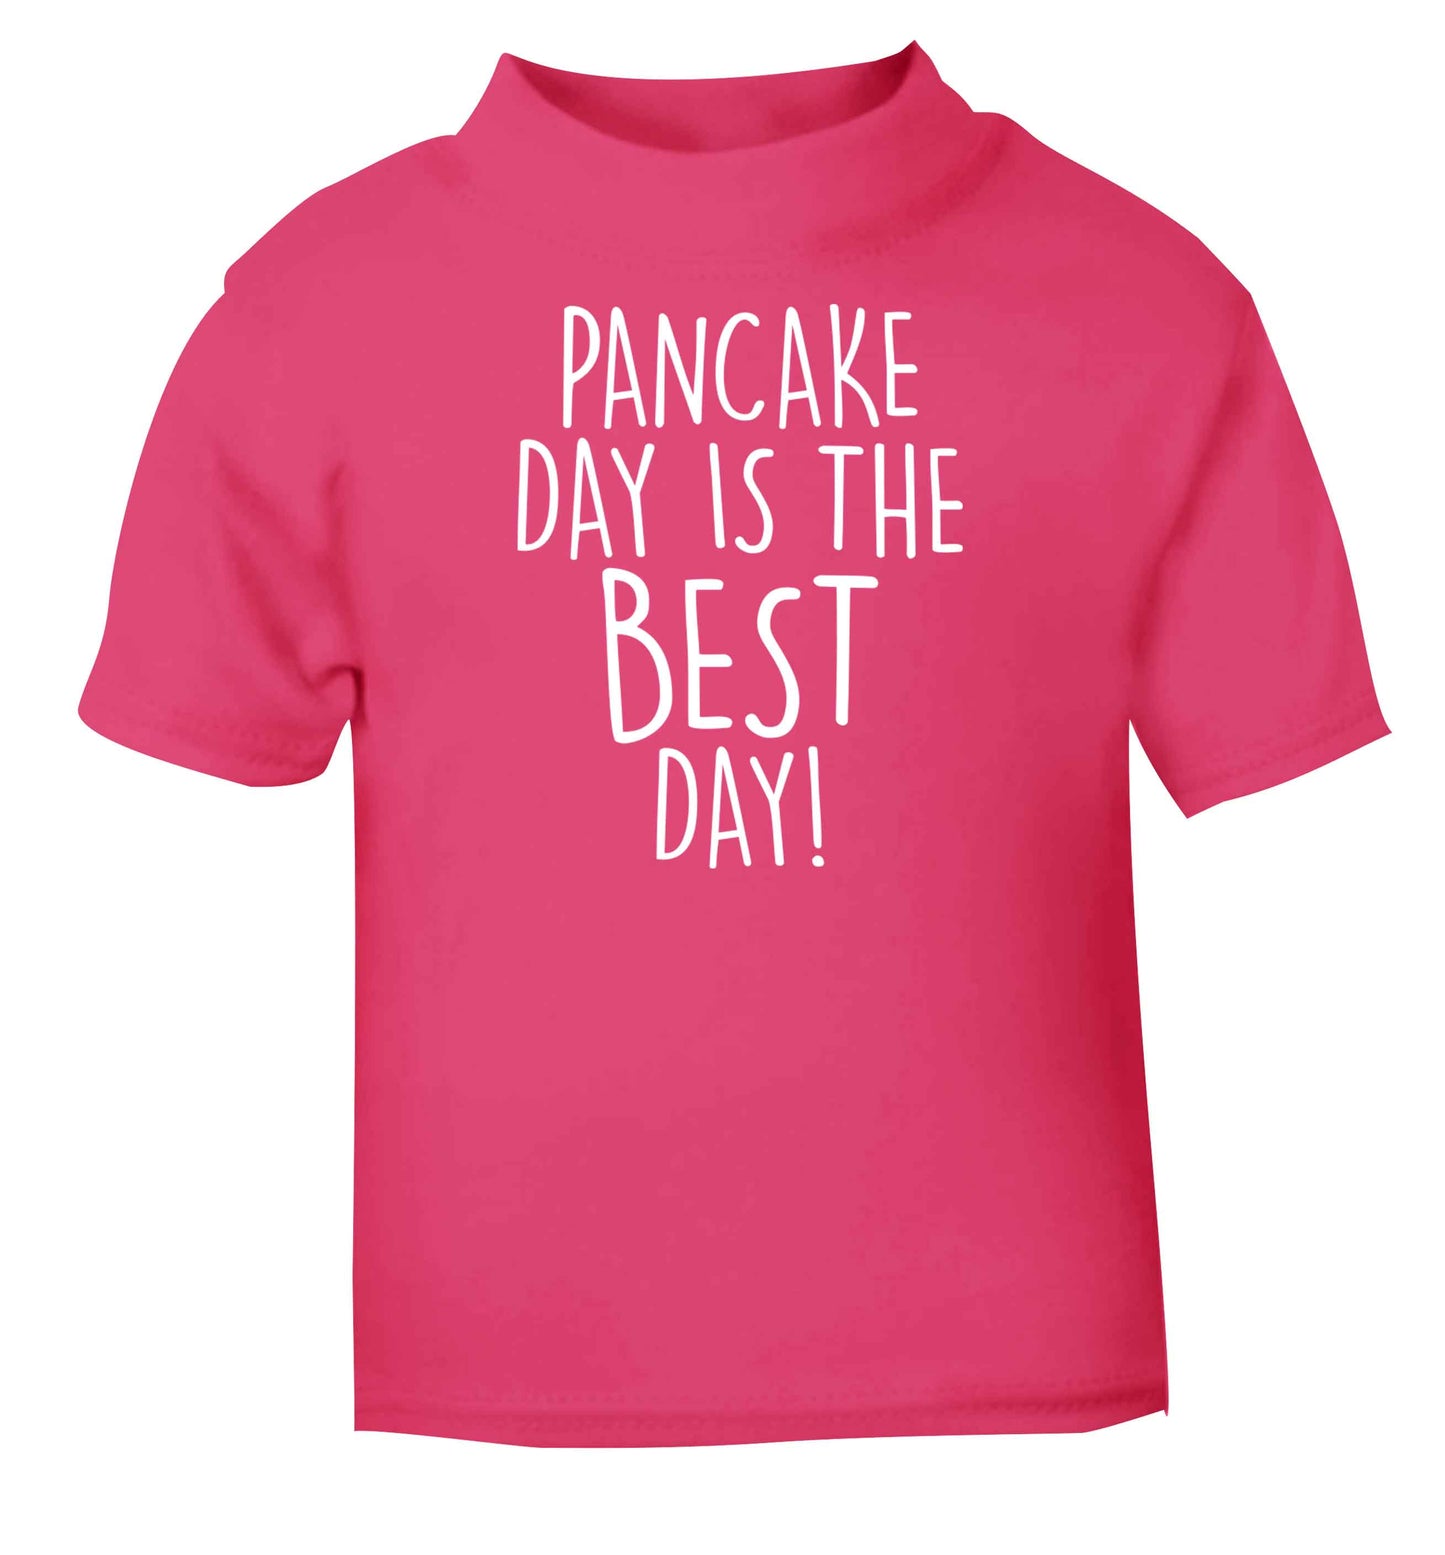 Pancake day is the best day pink baby toddler Tshirt 2 Years